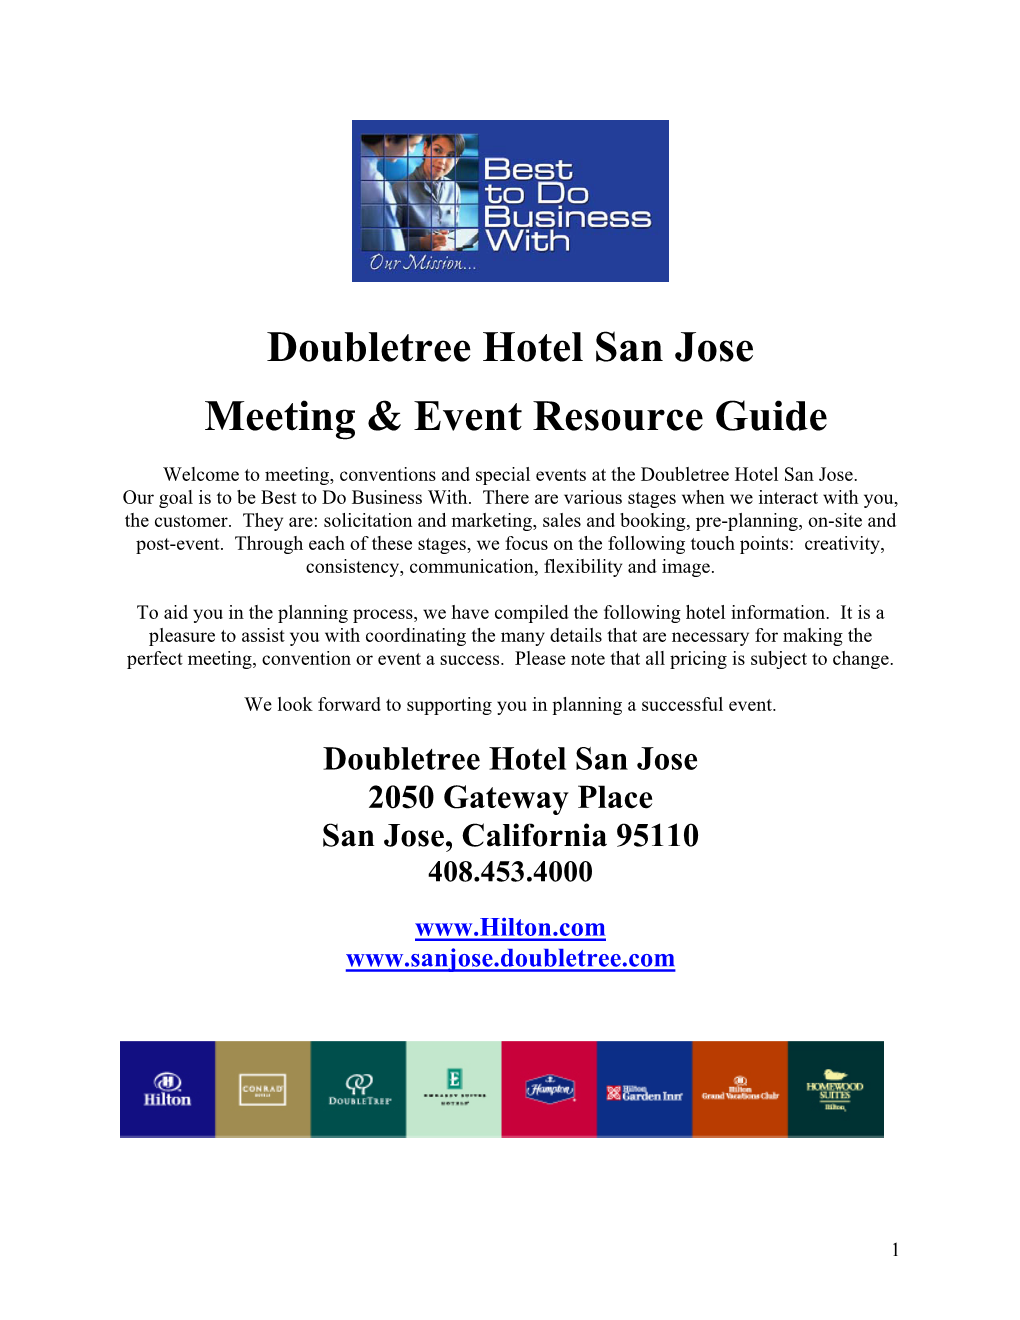 Doubletree Hotel San Jose Meeting & Event Resource Guide